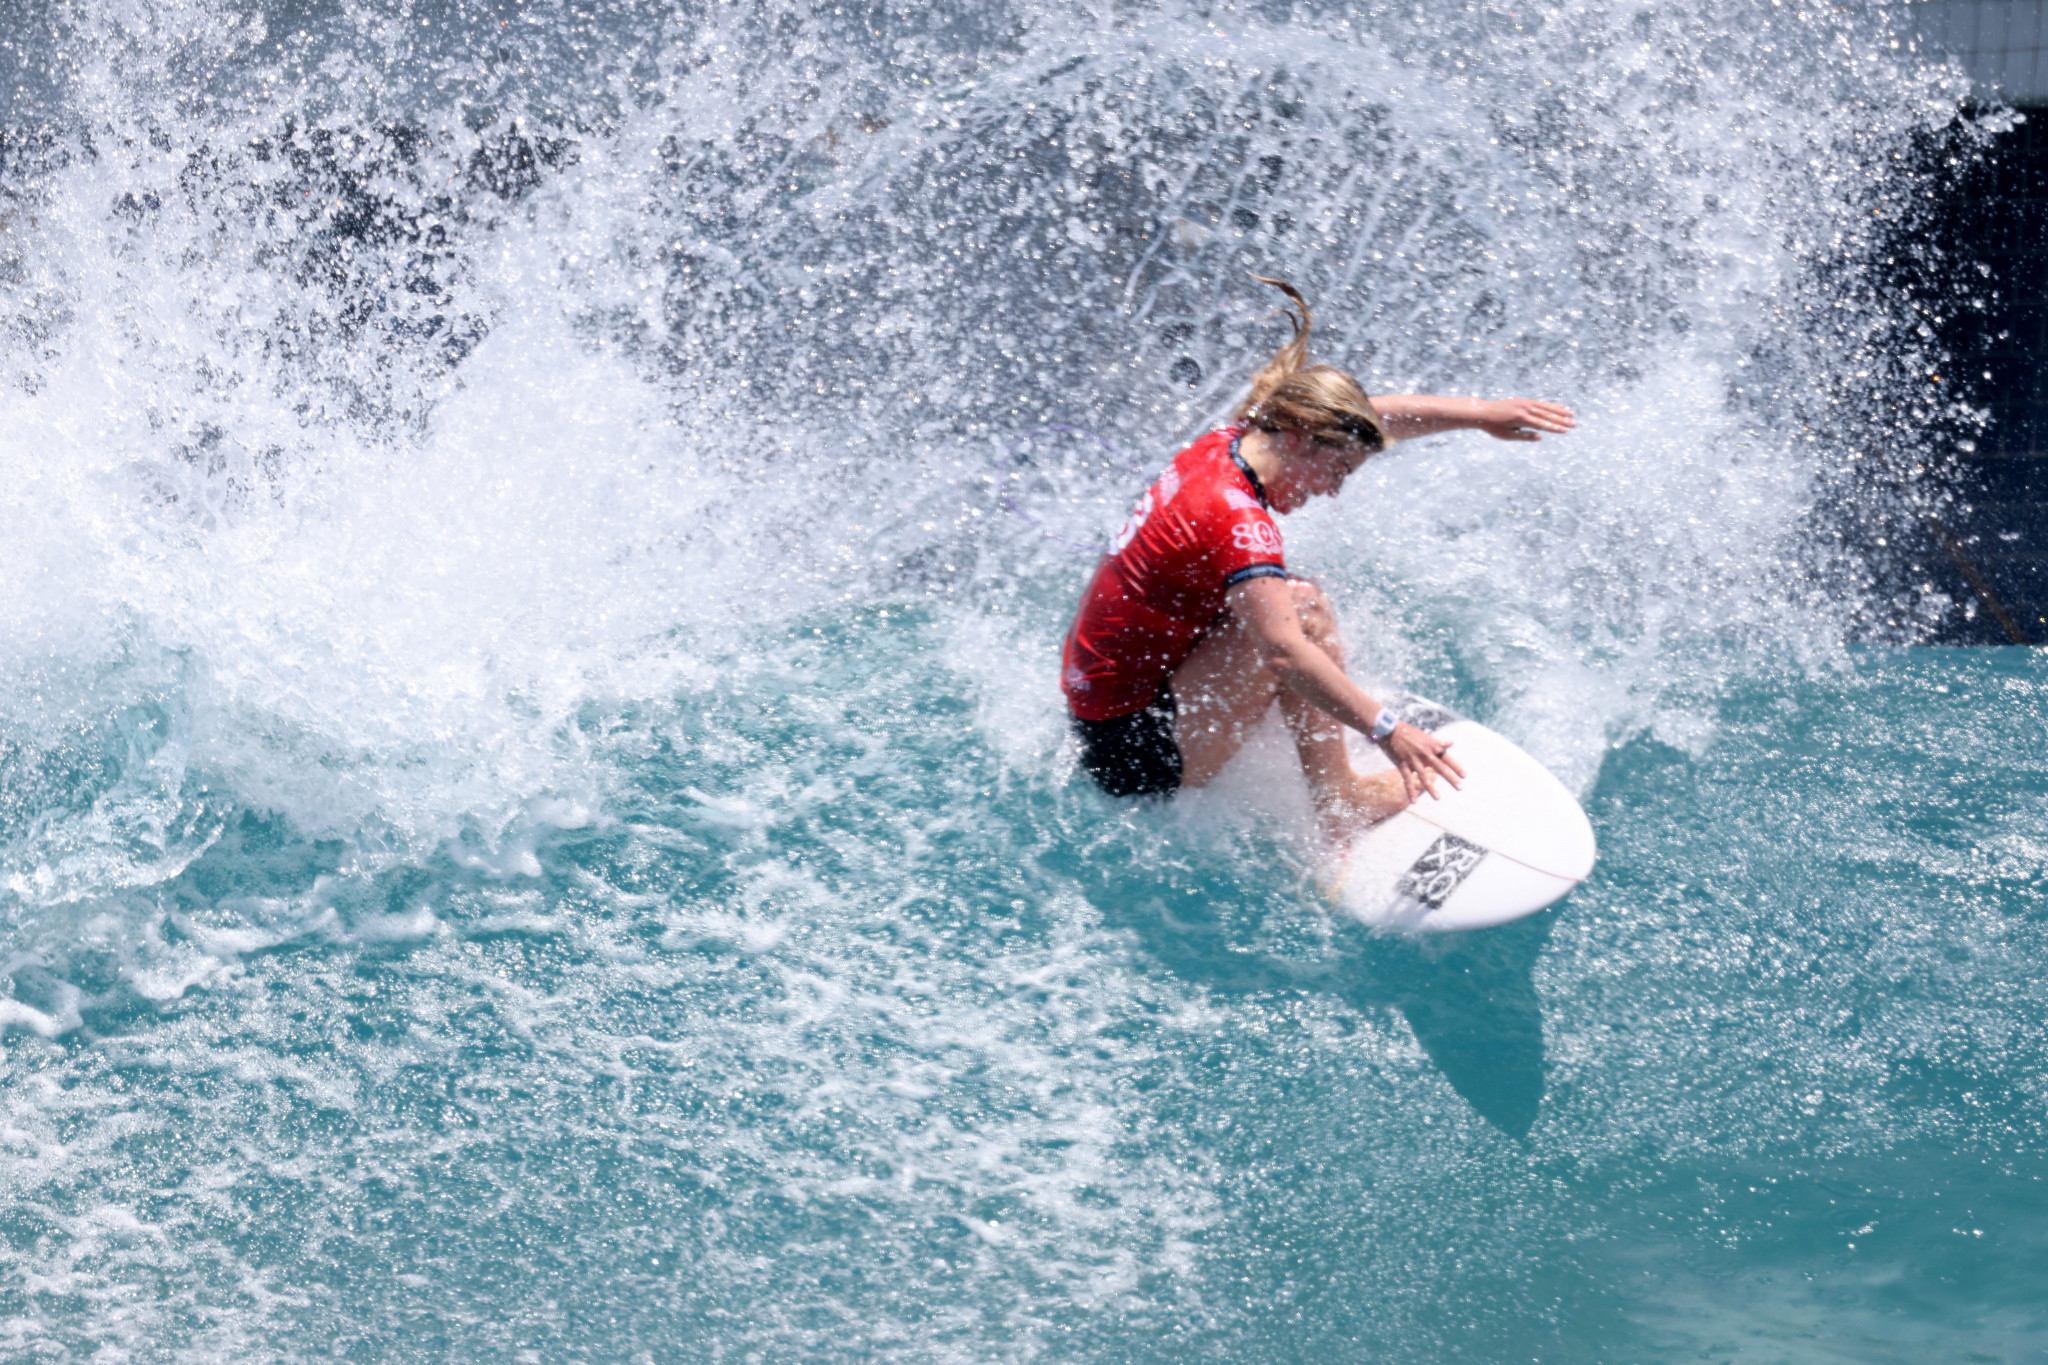 Marks and der Huls star in women's round two at World Surfing Games